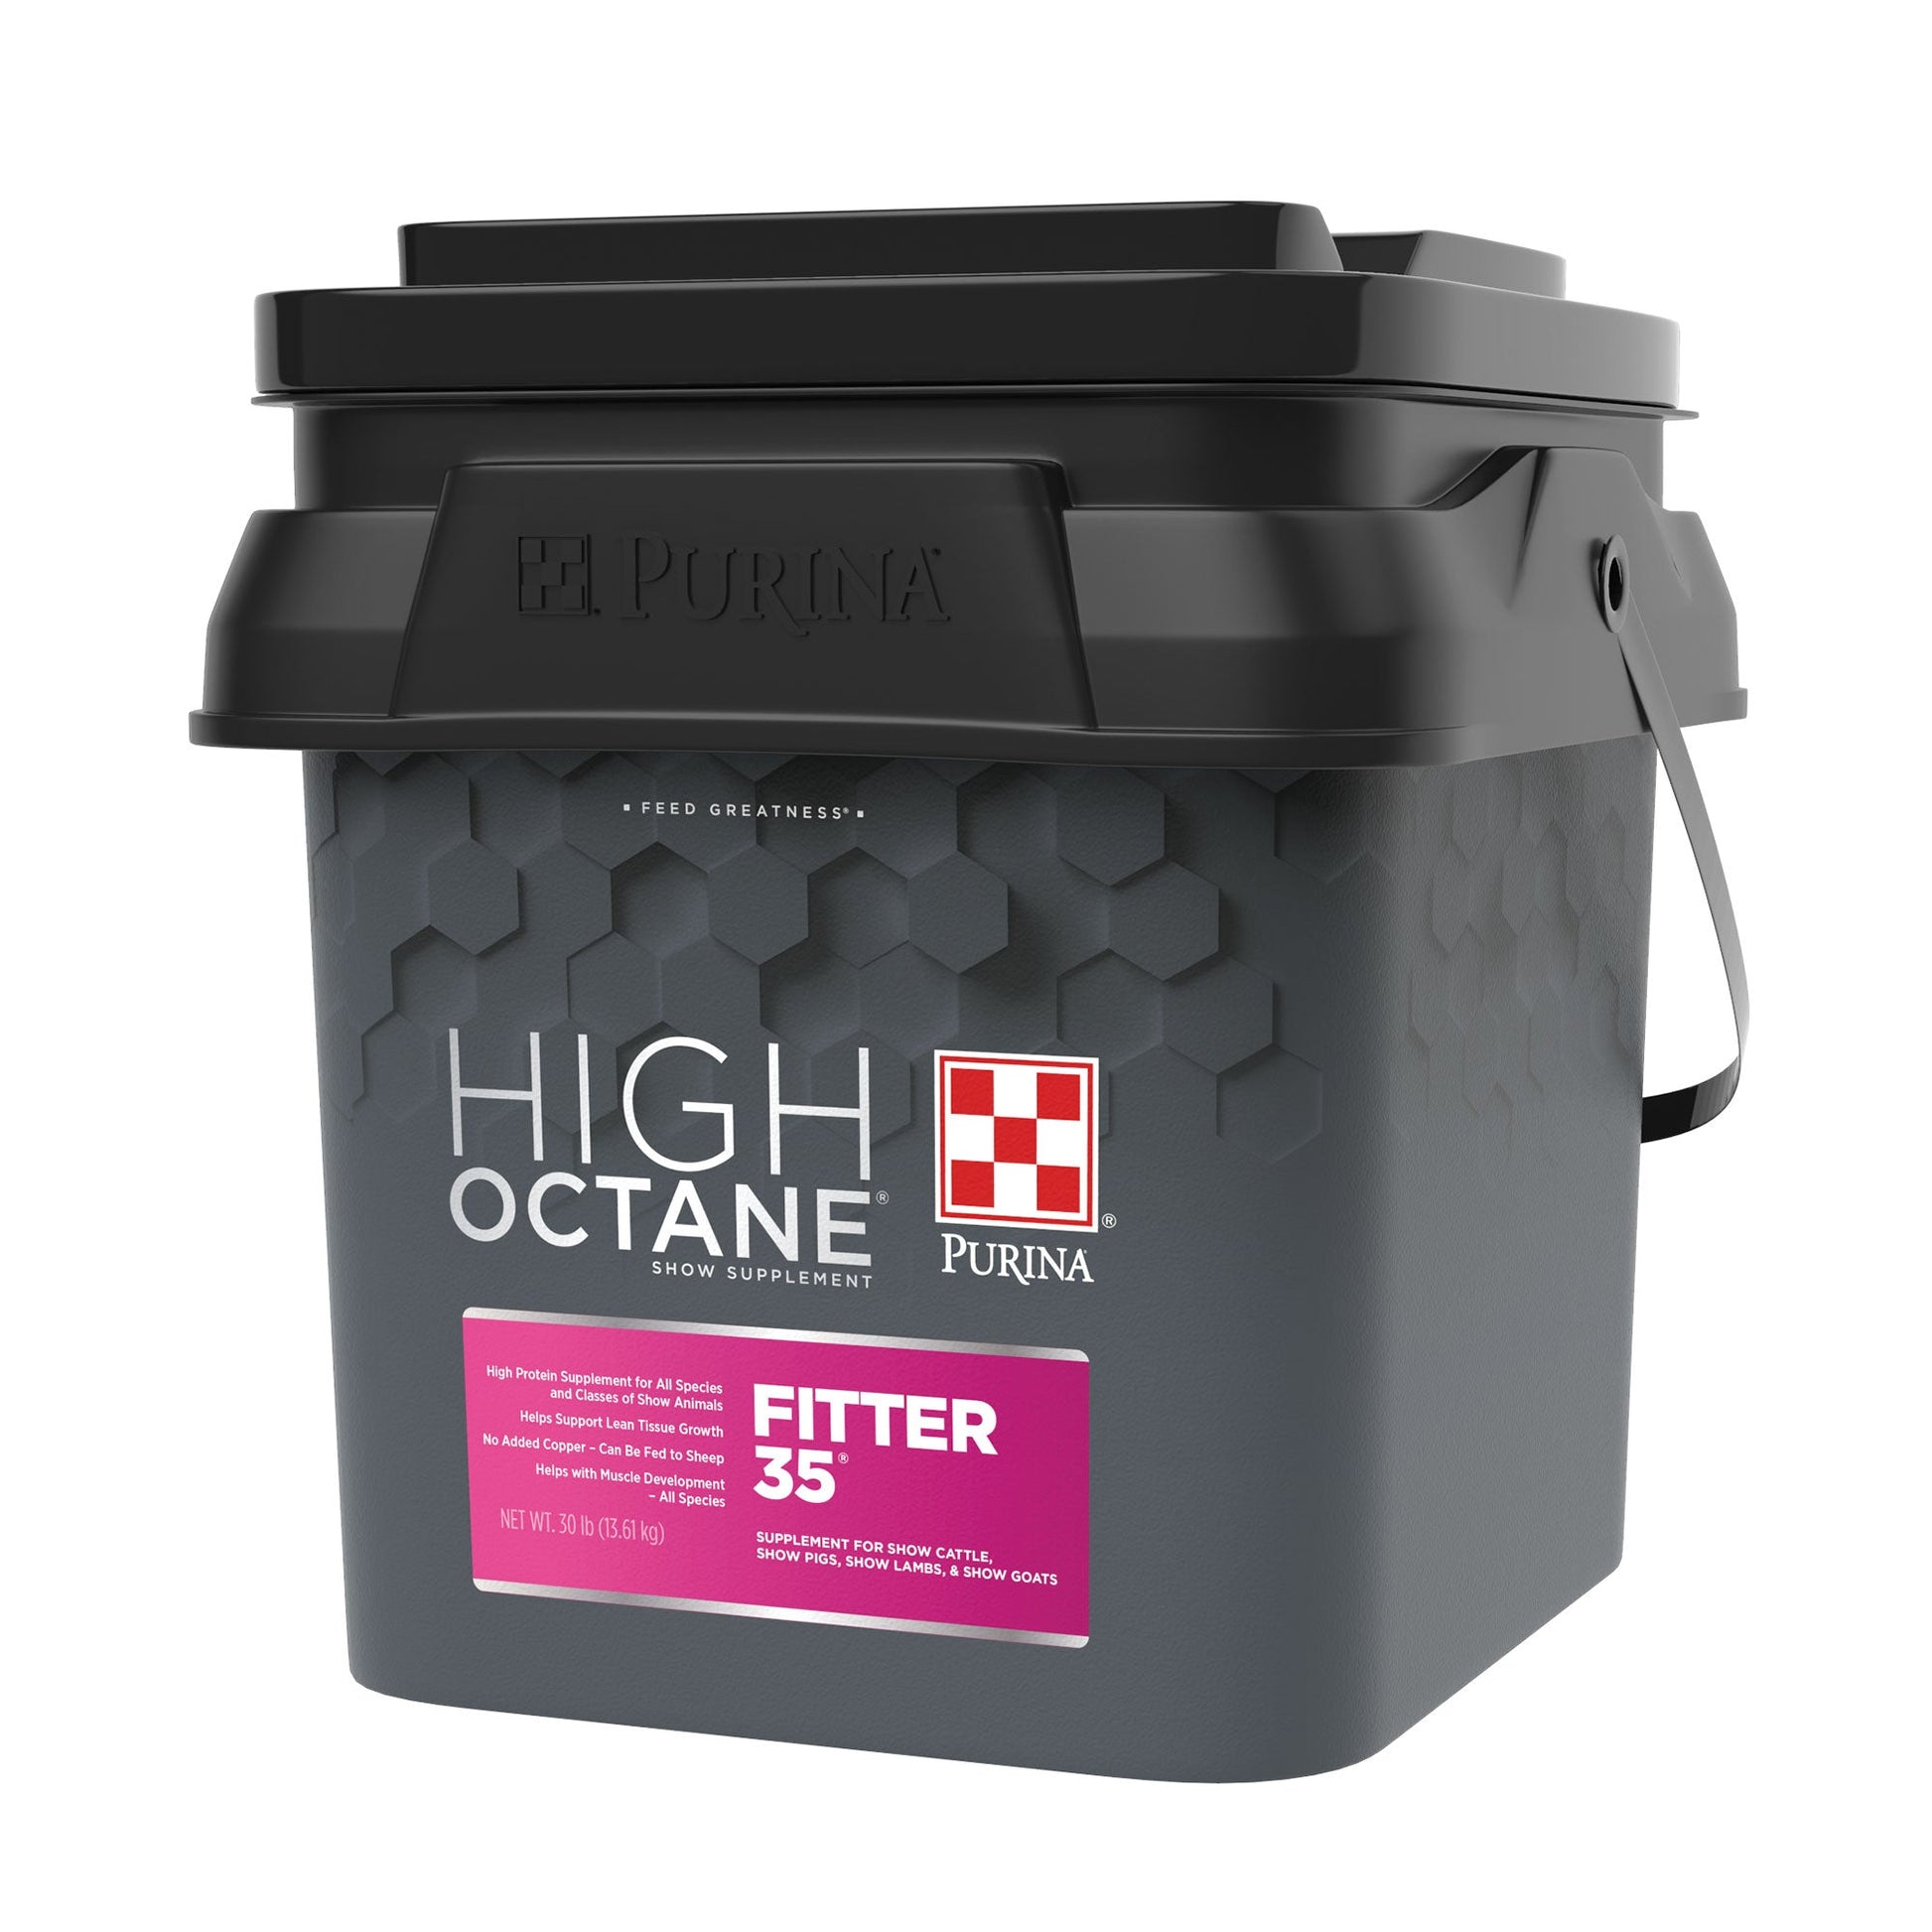 Right angle of Purina High Octane Fitter 35 Show Supplement